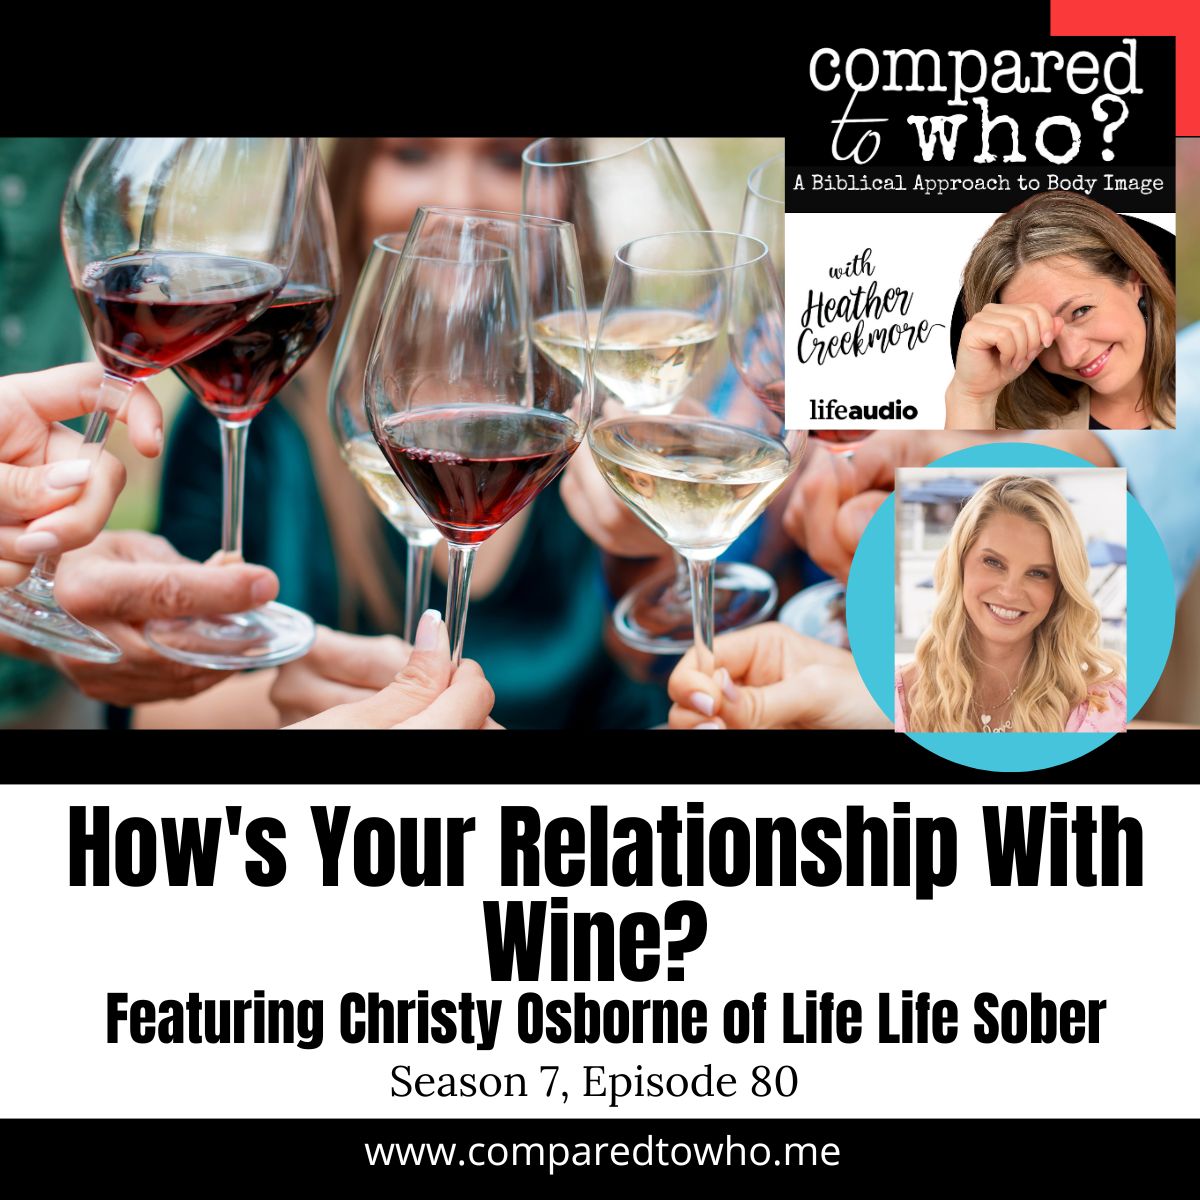 How’s Your Relationship With Wine? Featuring Christy Osborne